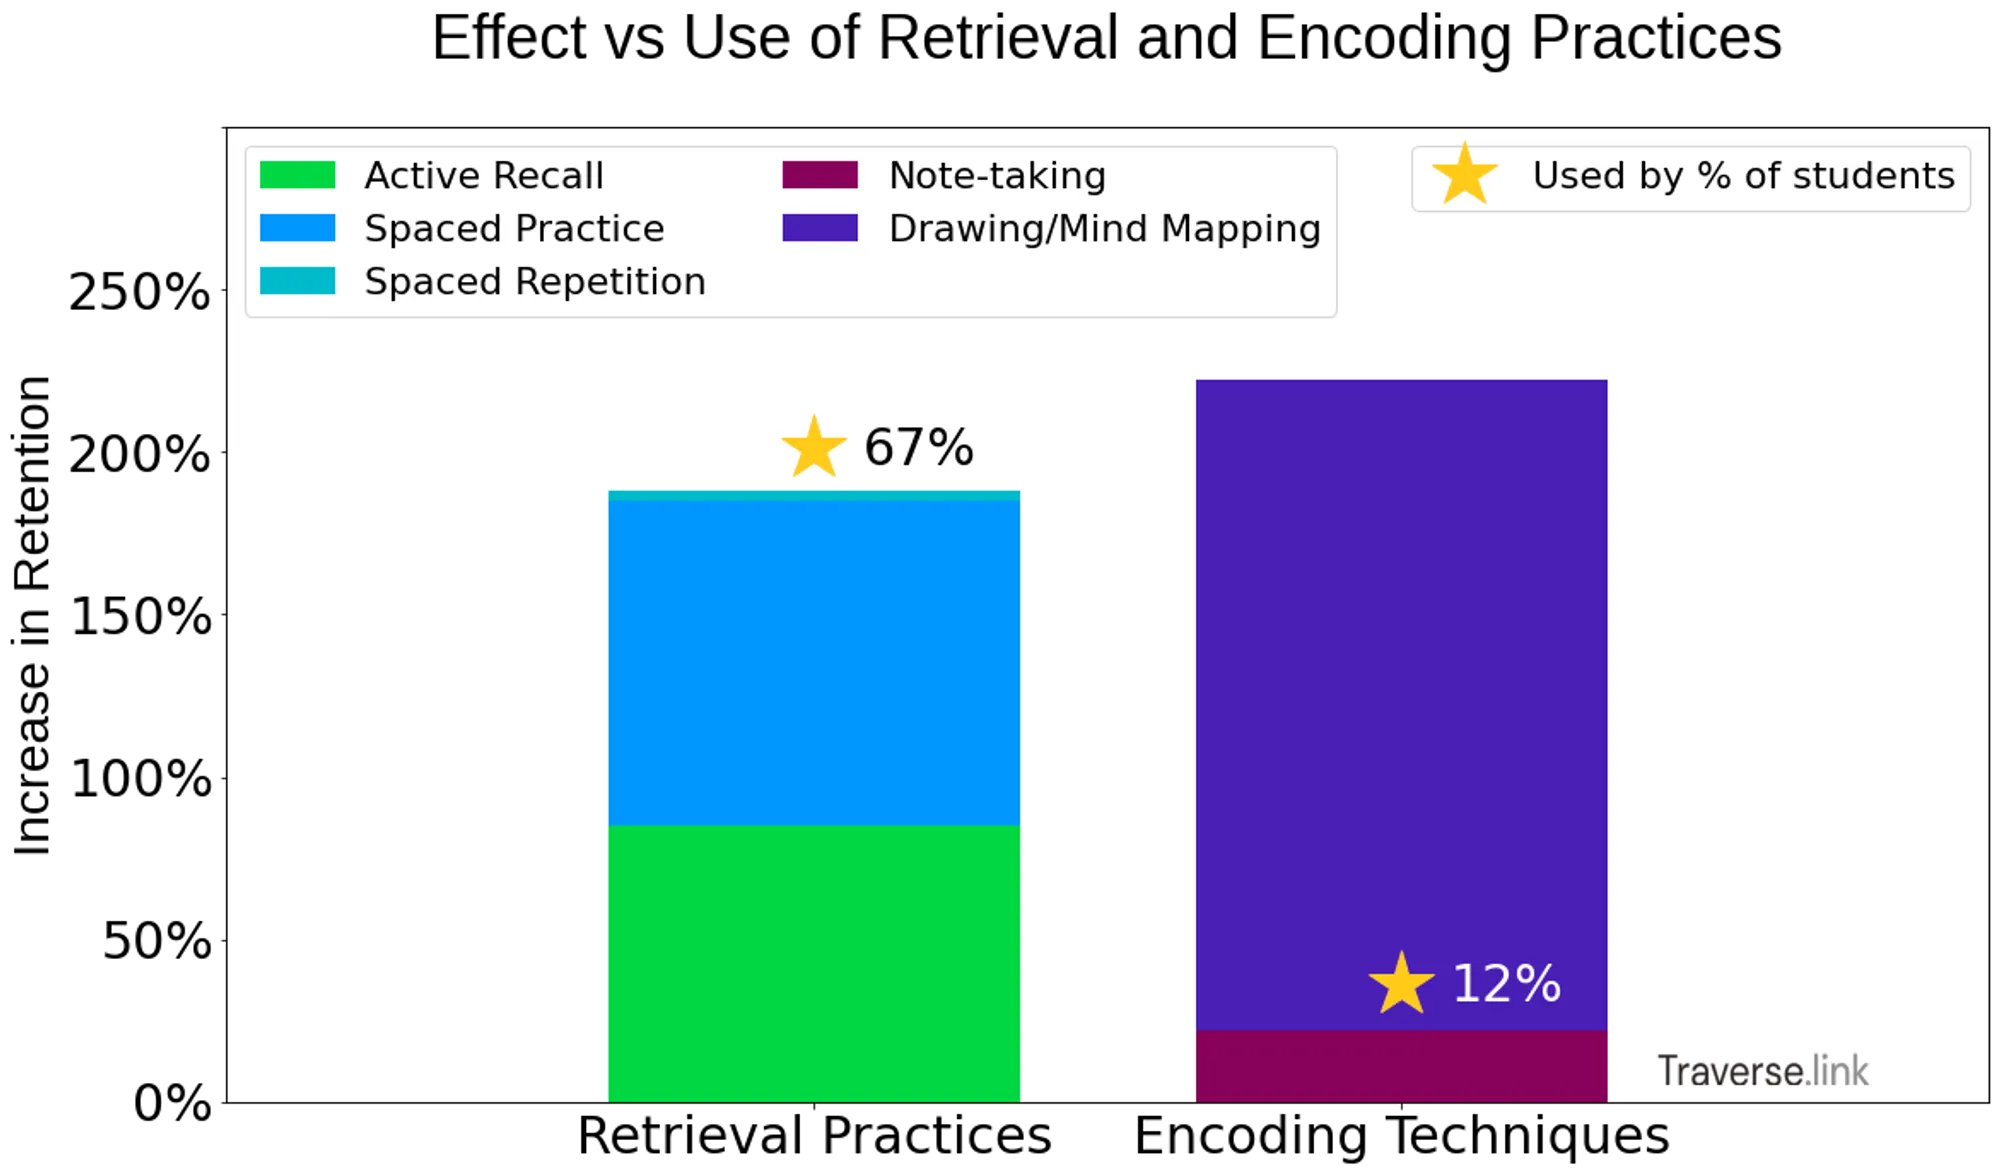 Effectiveness of retrieval and encoding practice, compared to actual use by students